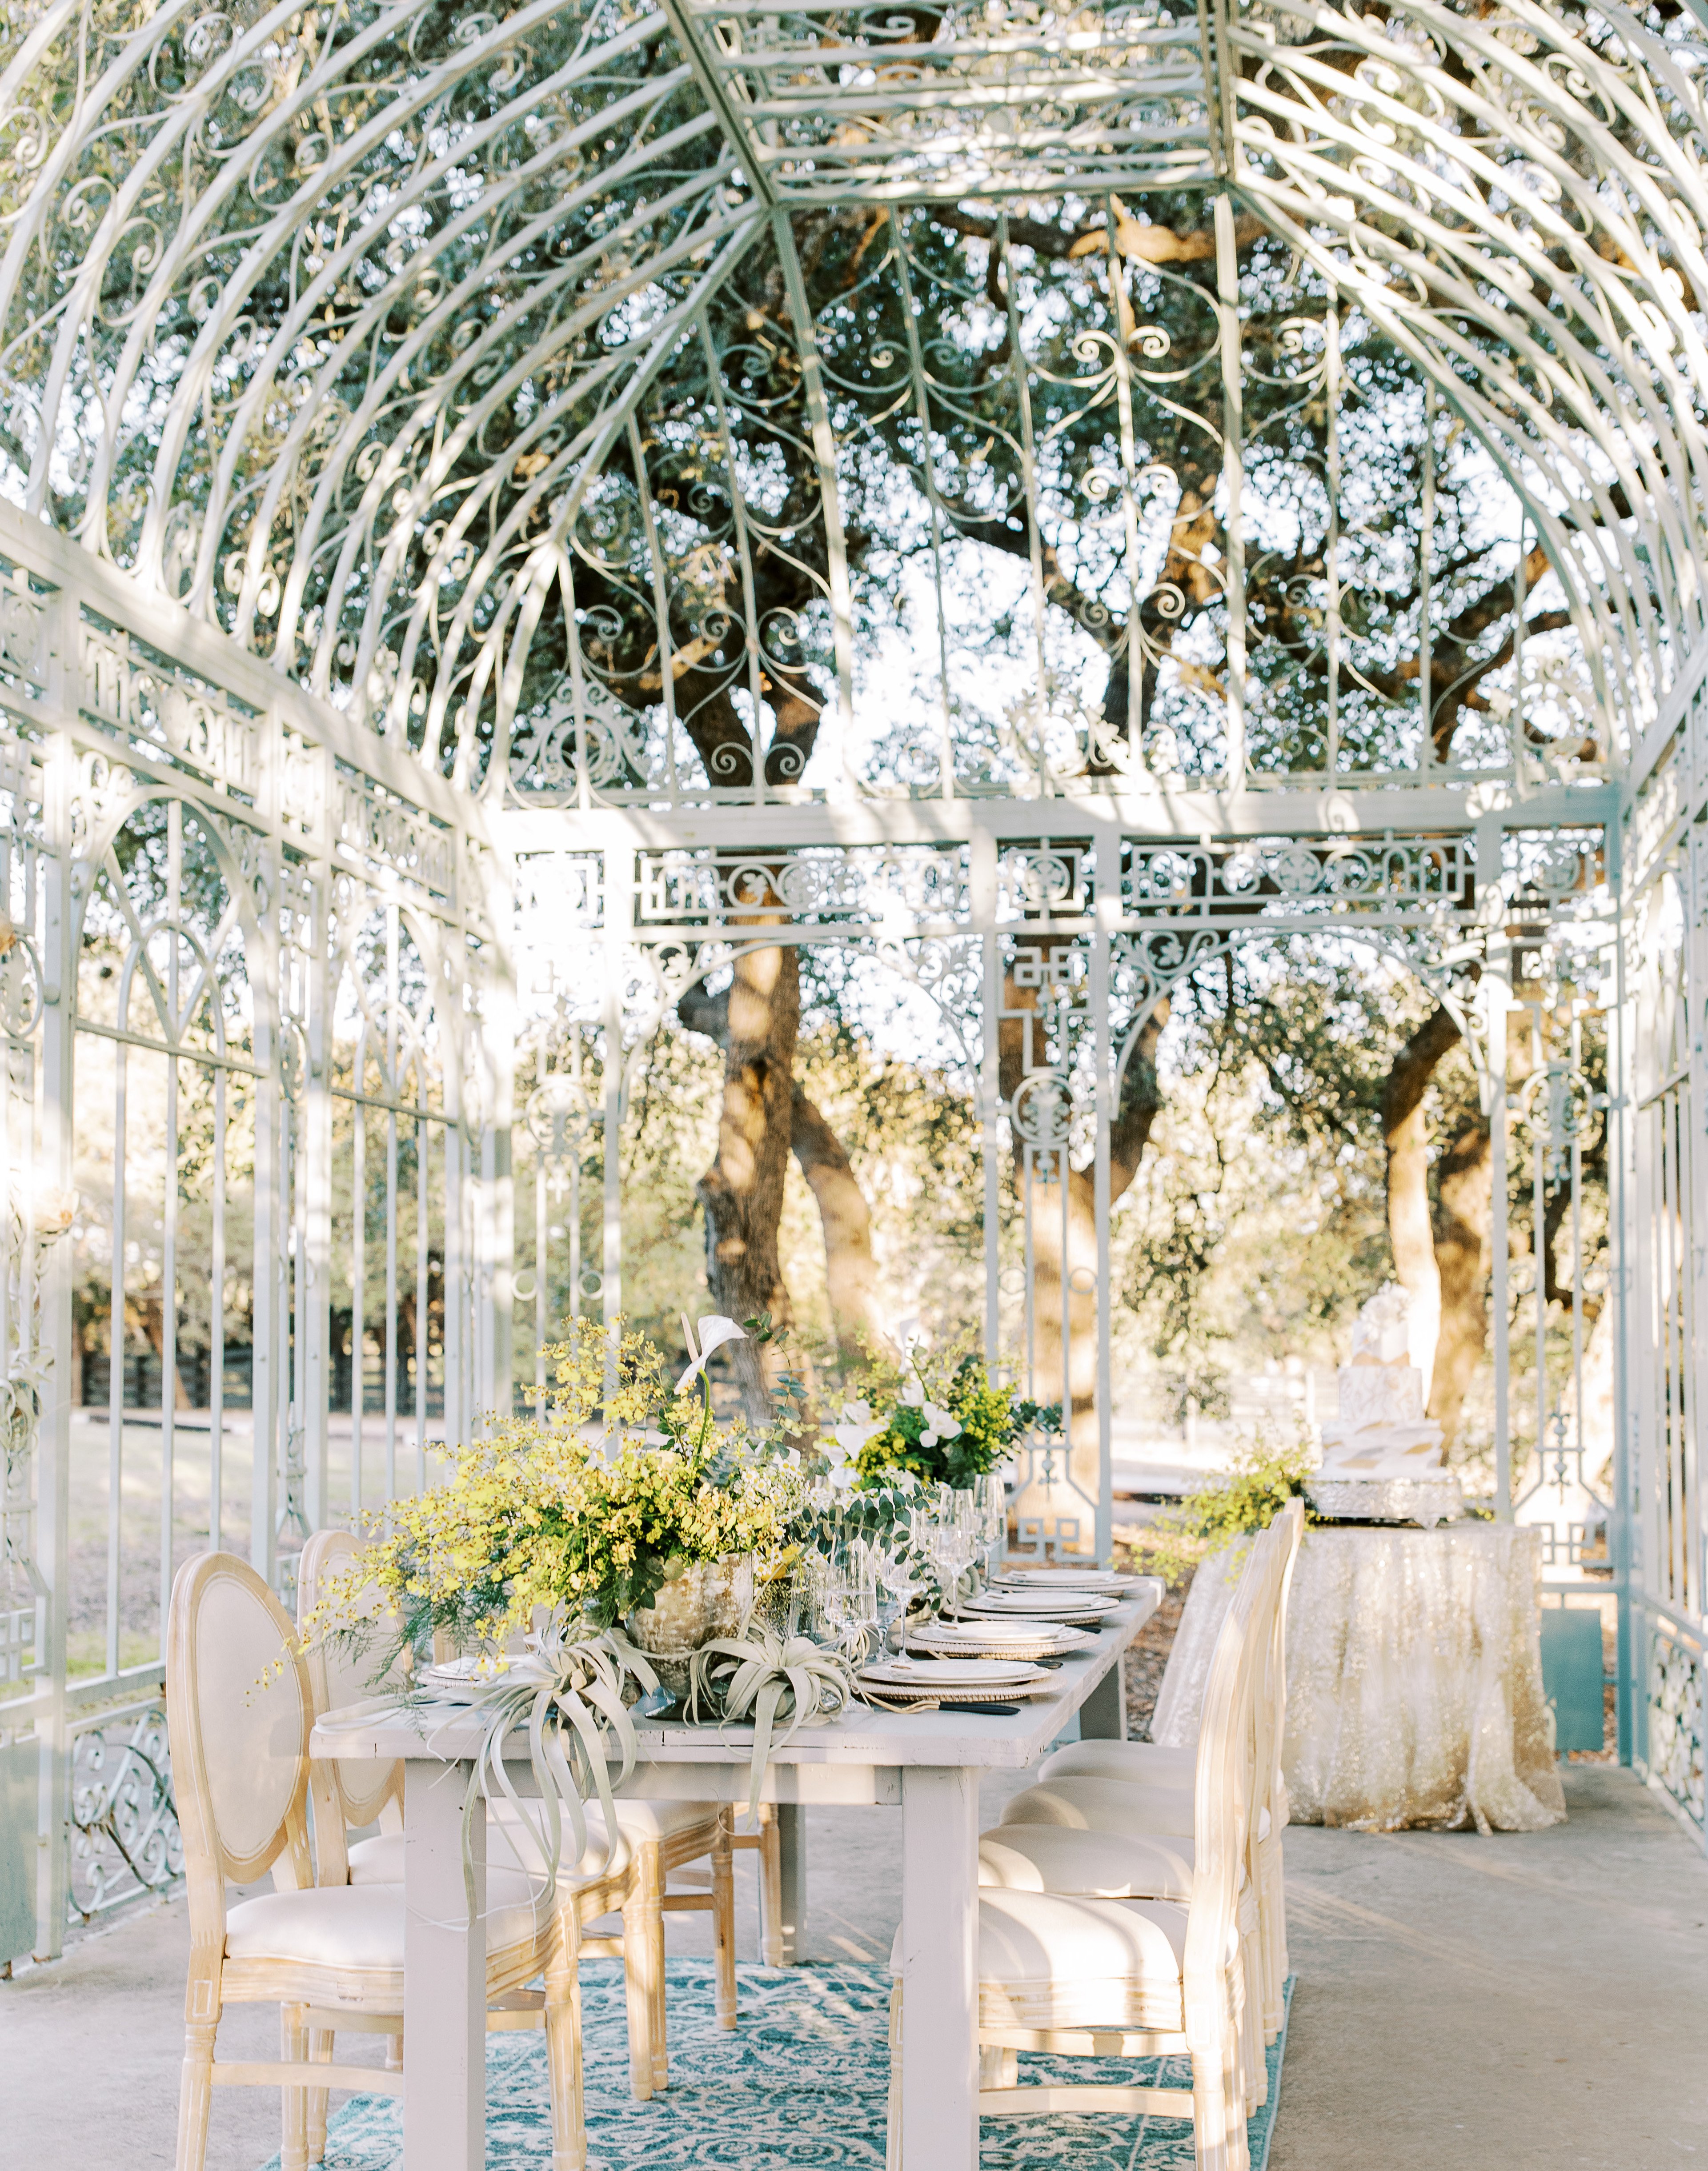 An outdoor vintage greenhouse at The Ma Maison in the Texas Hill Country.